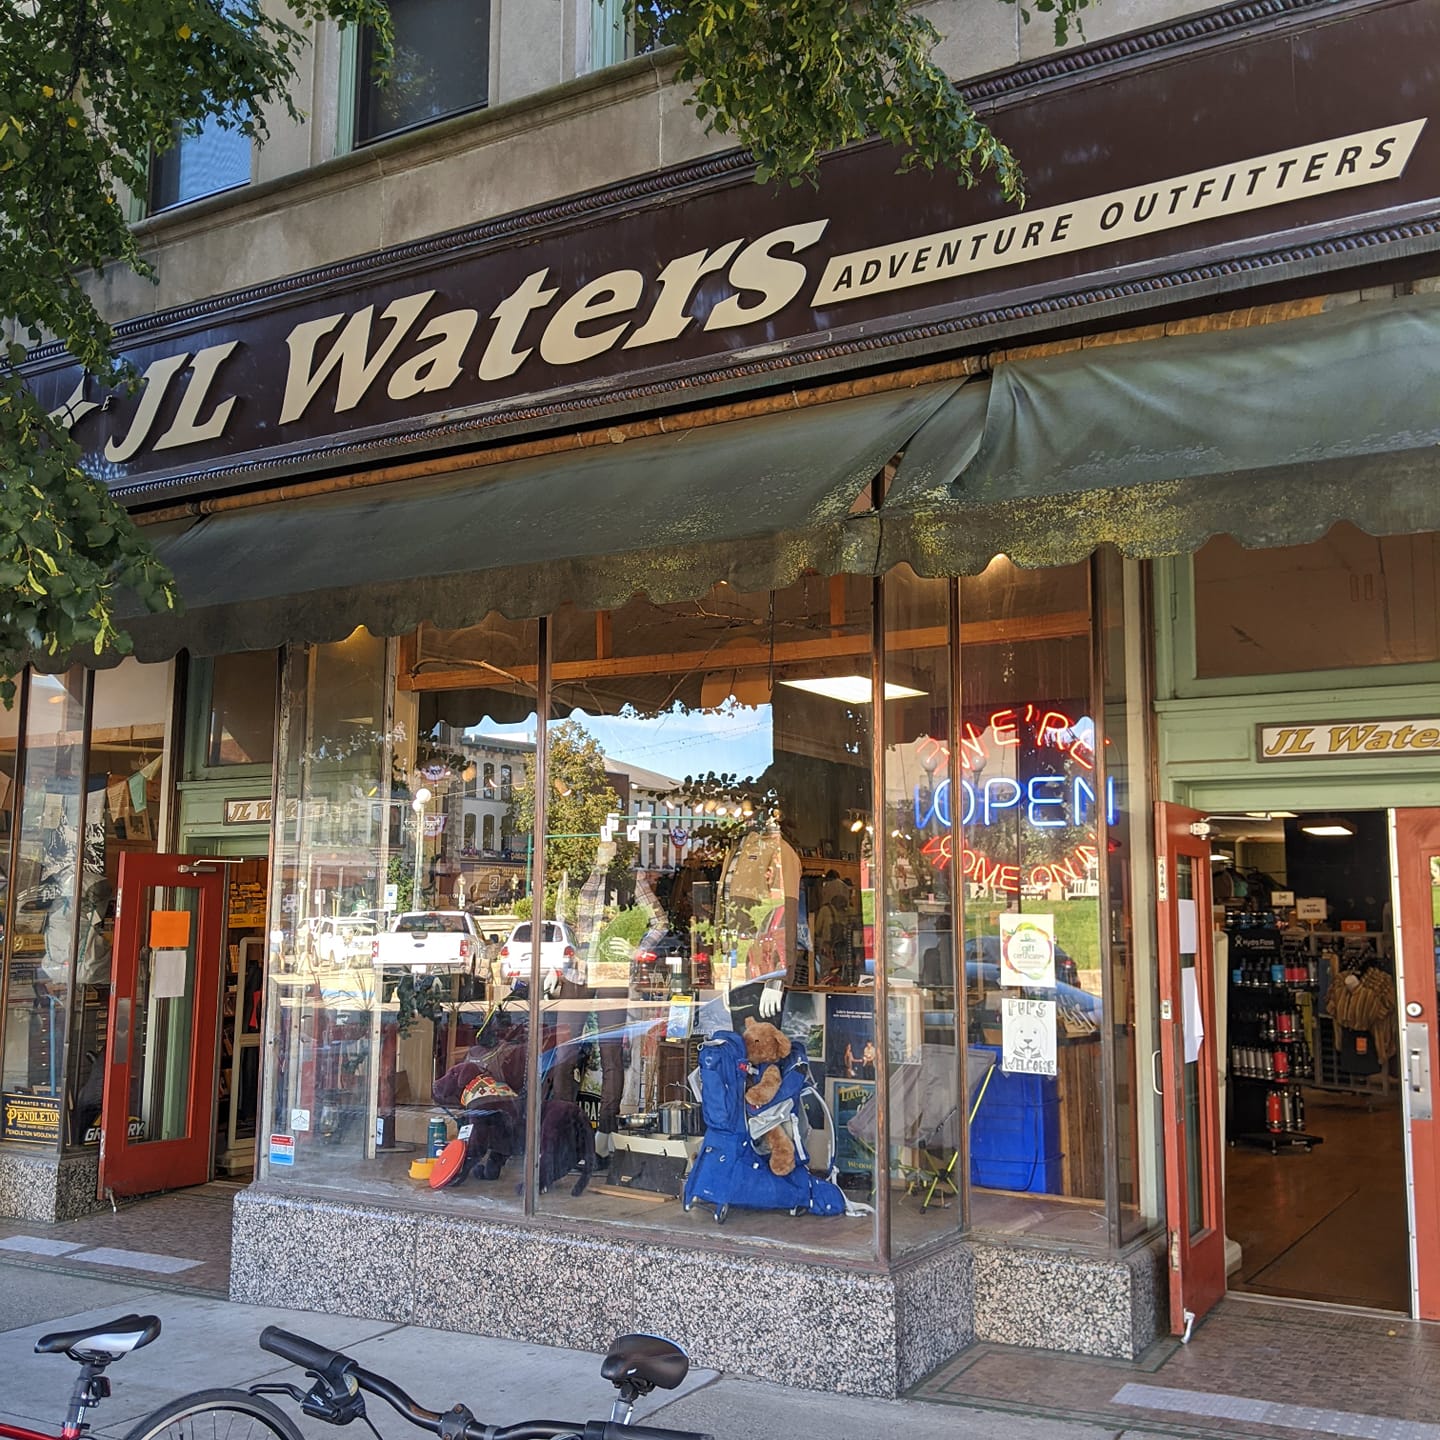 JL Waters Storefront Photo